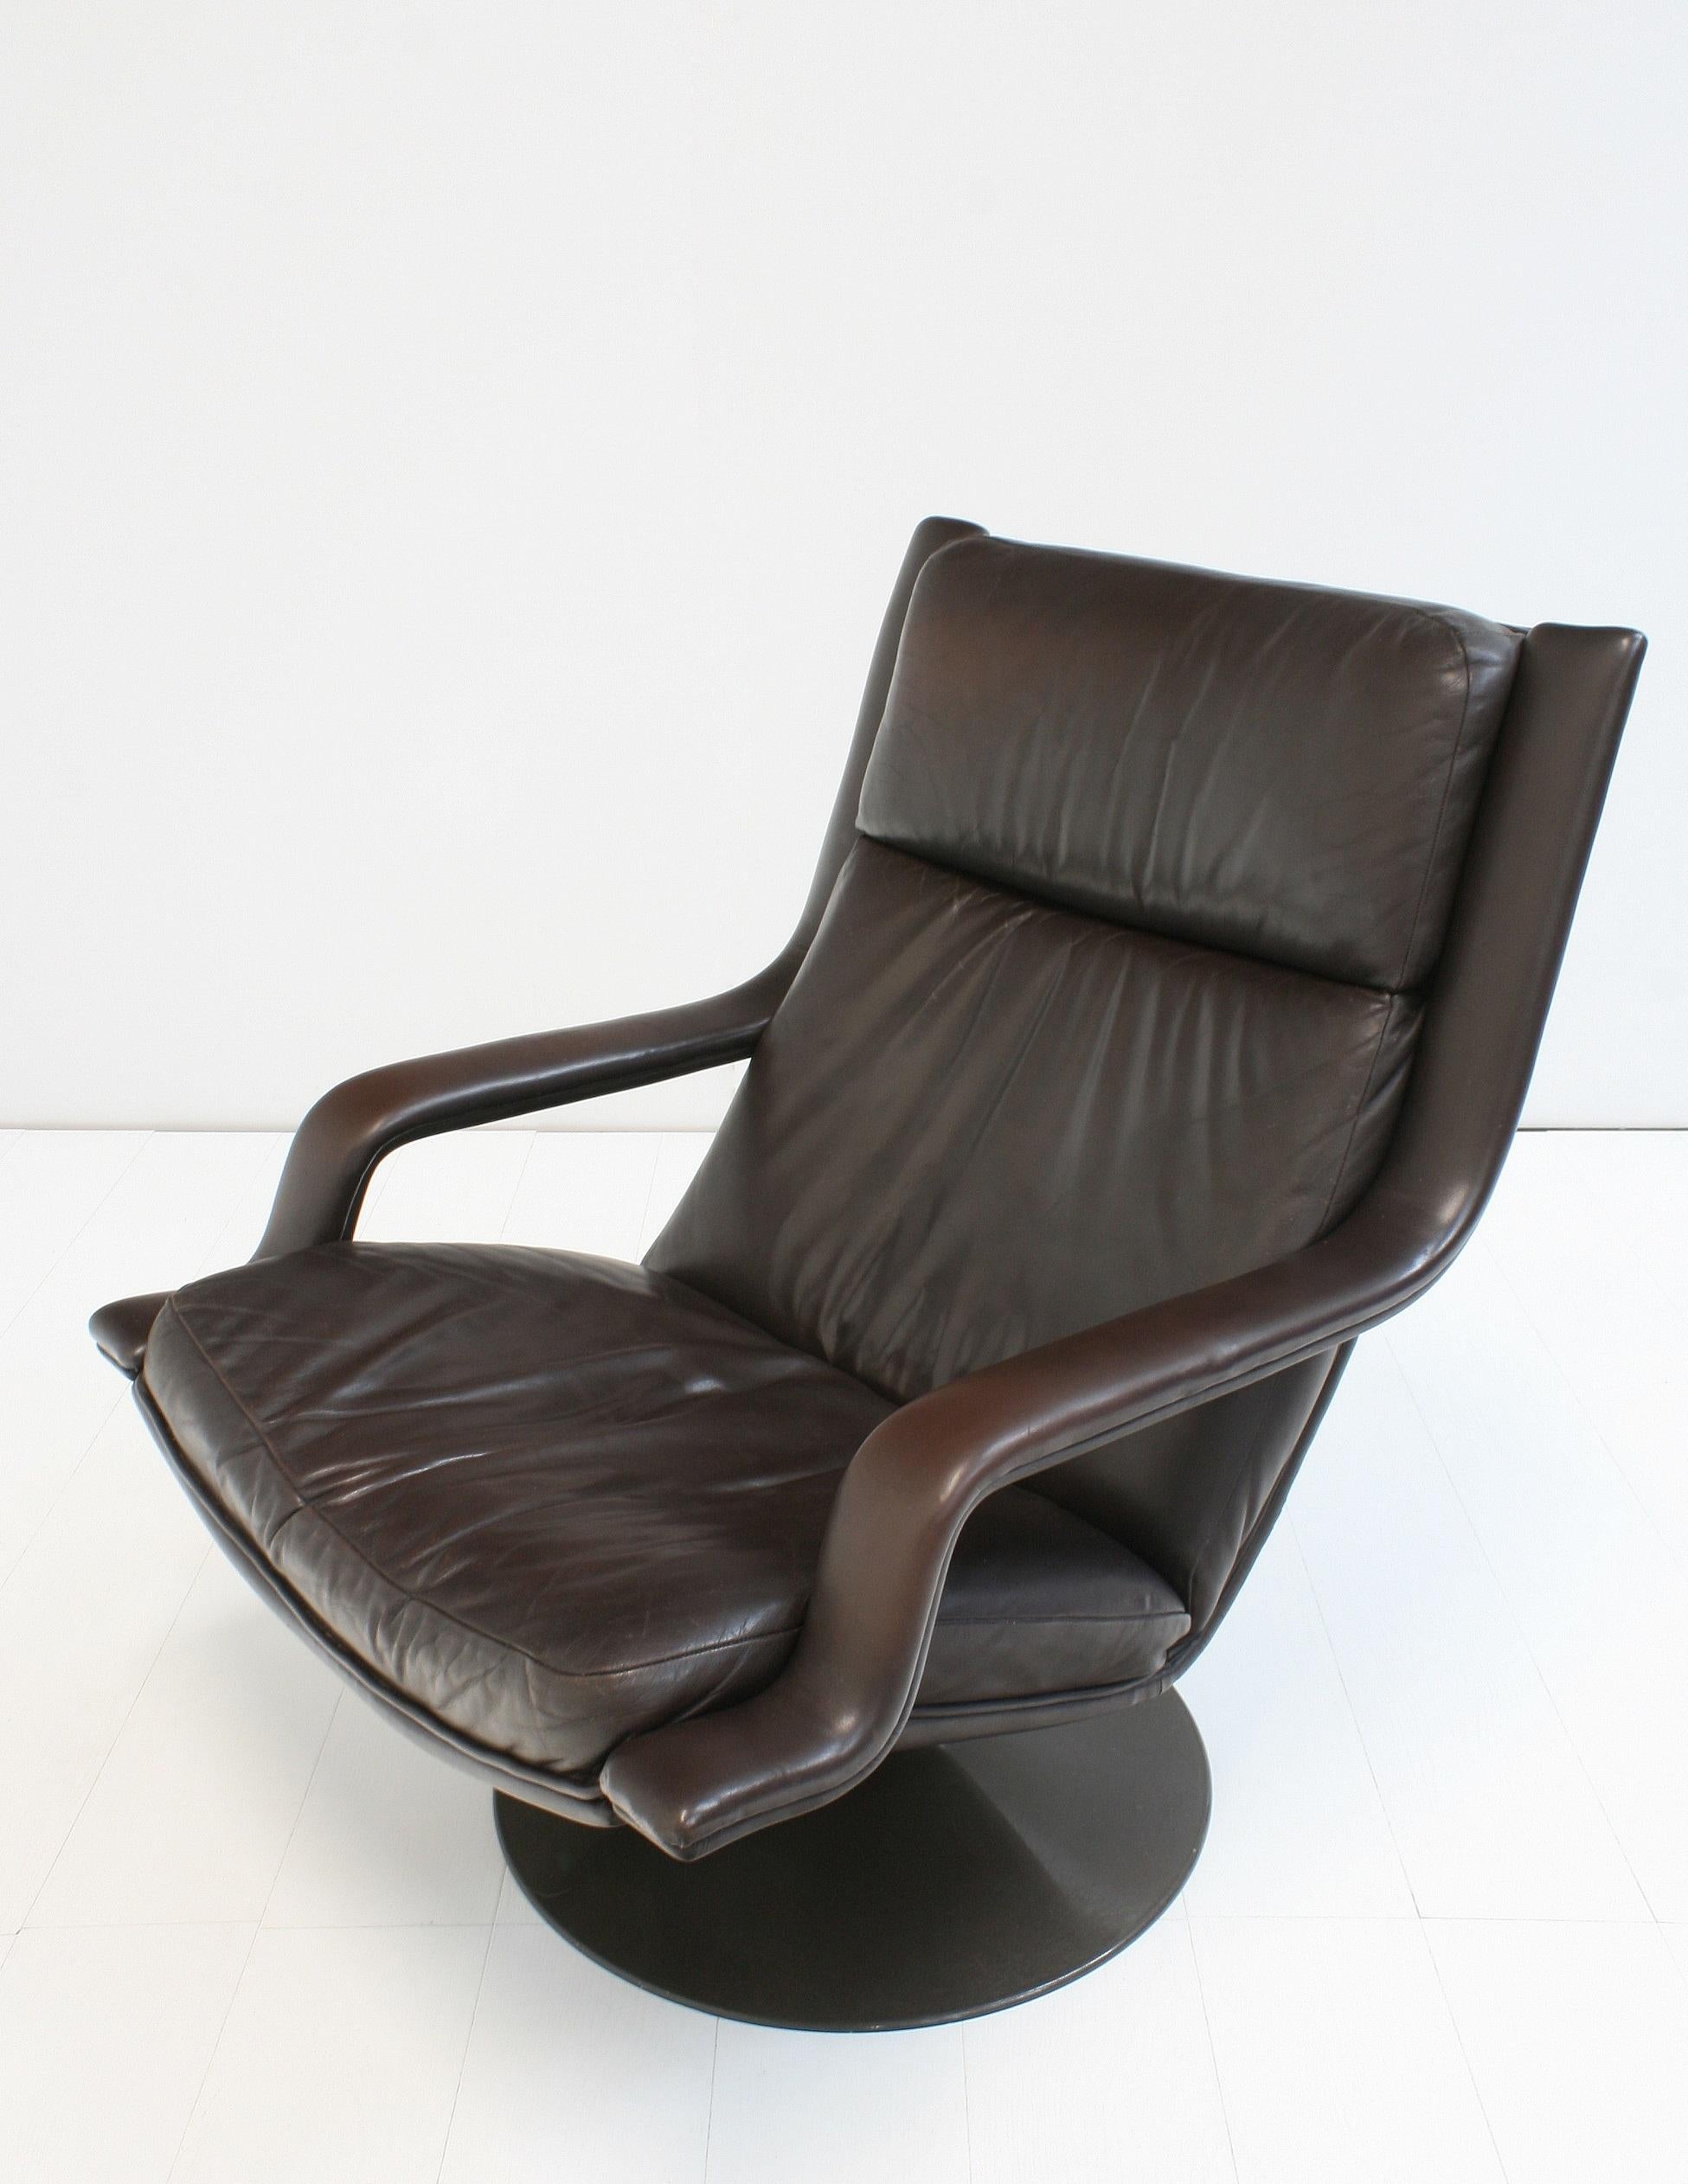 2 F152 Leather Swivel Lounge Chairs by Geoffrey D Harcourt for Artifort, 1970s For Sale 5